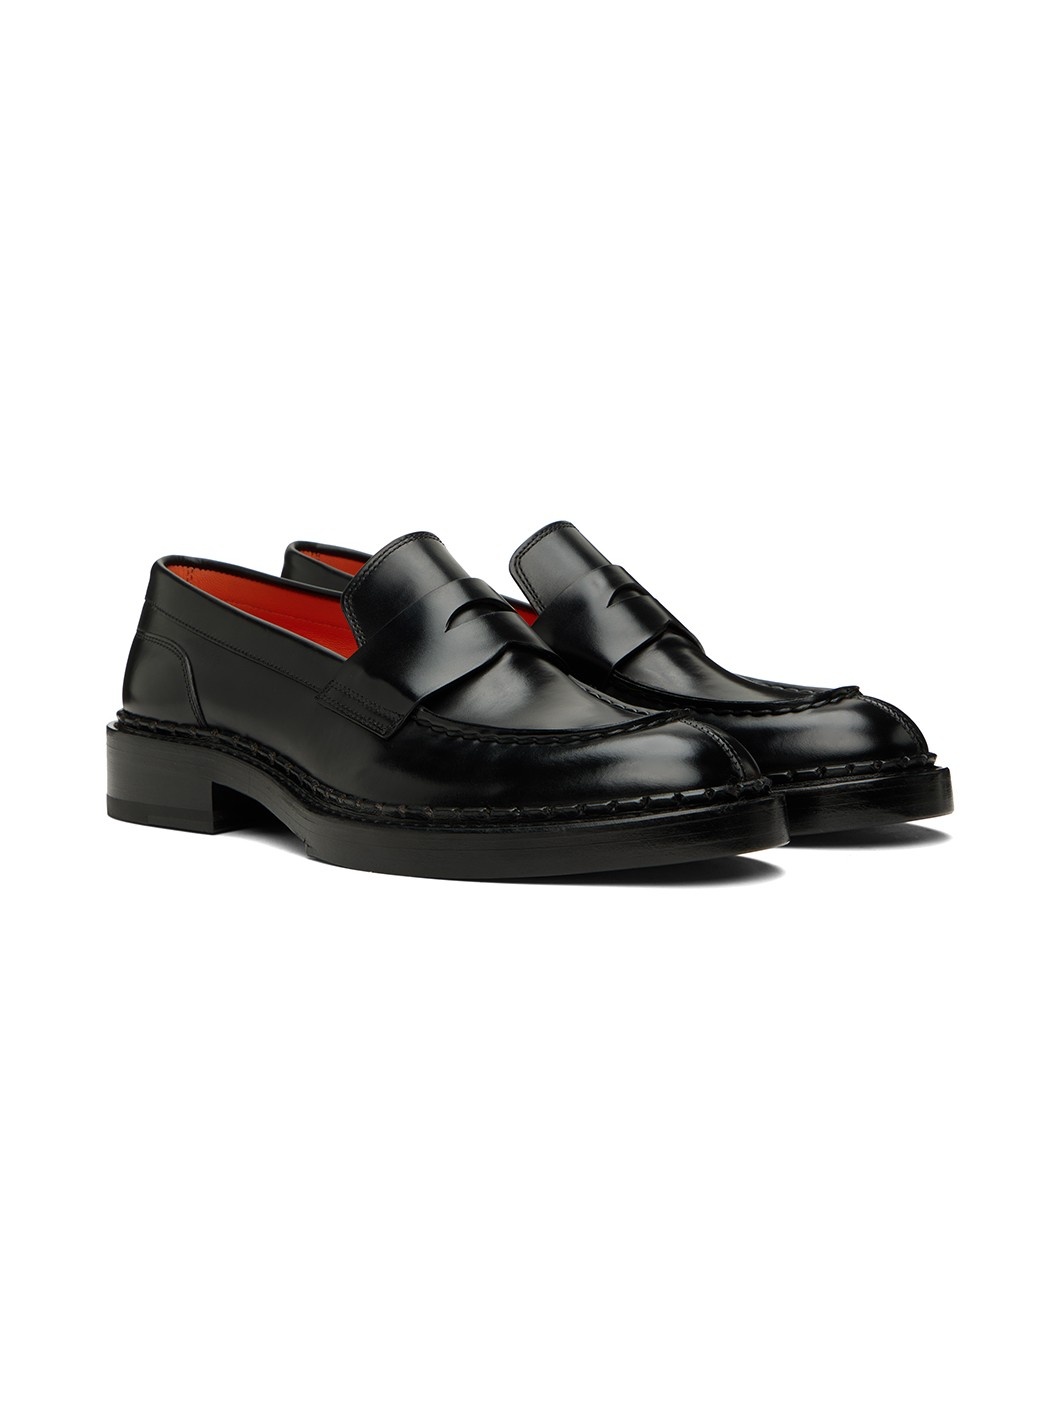 Black Leather Loafers - 4